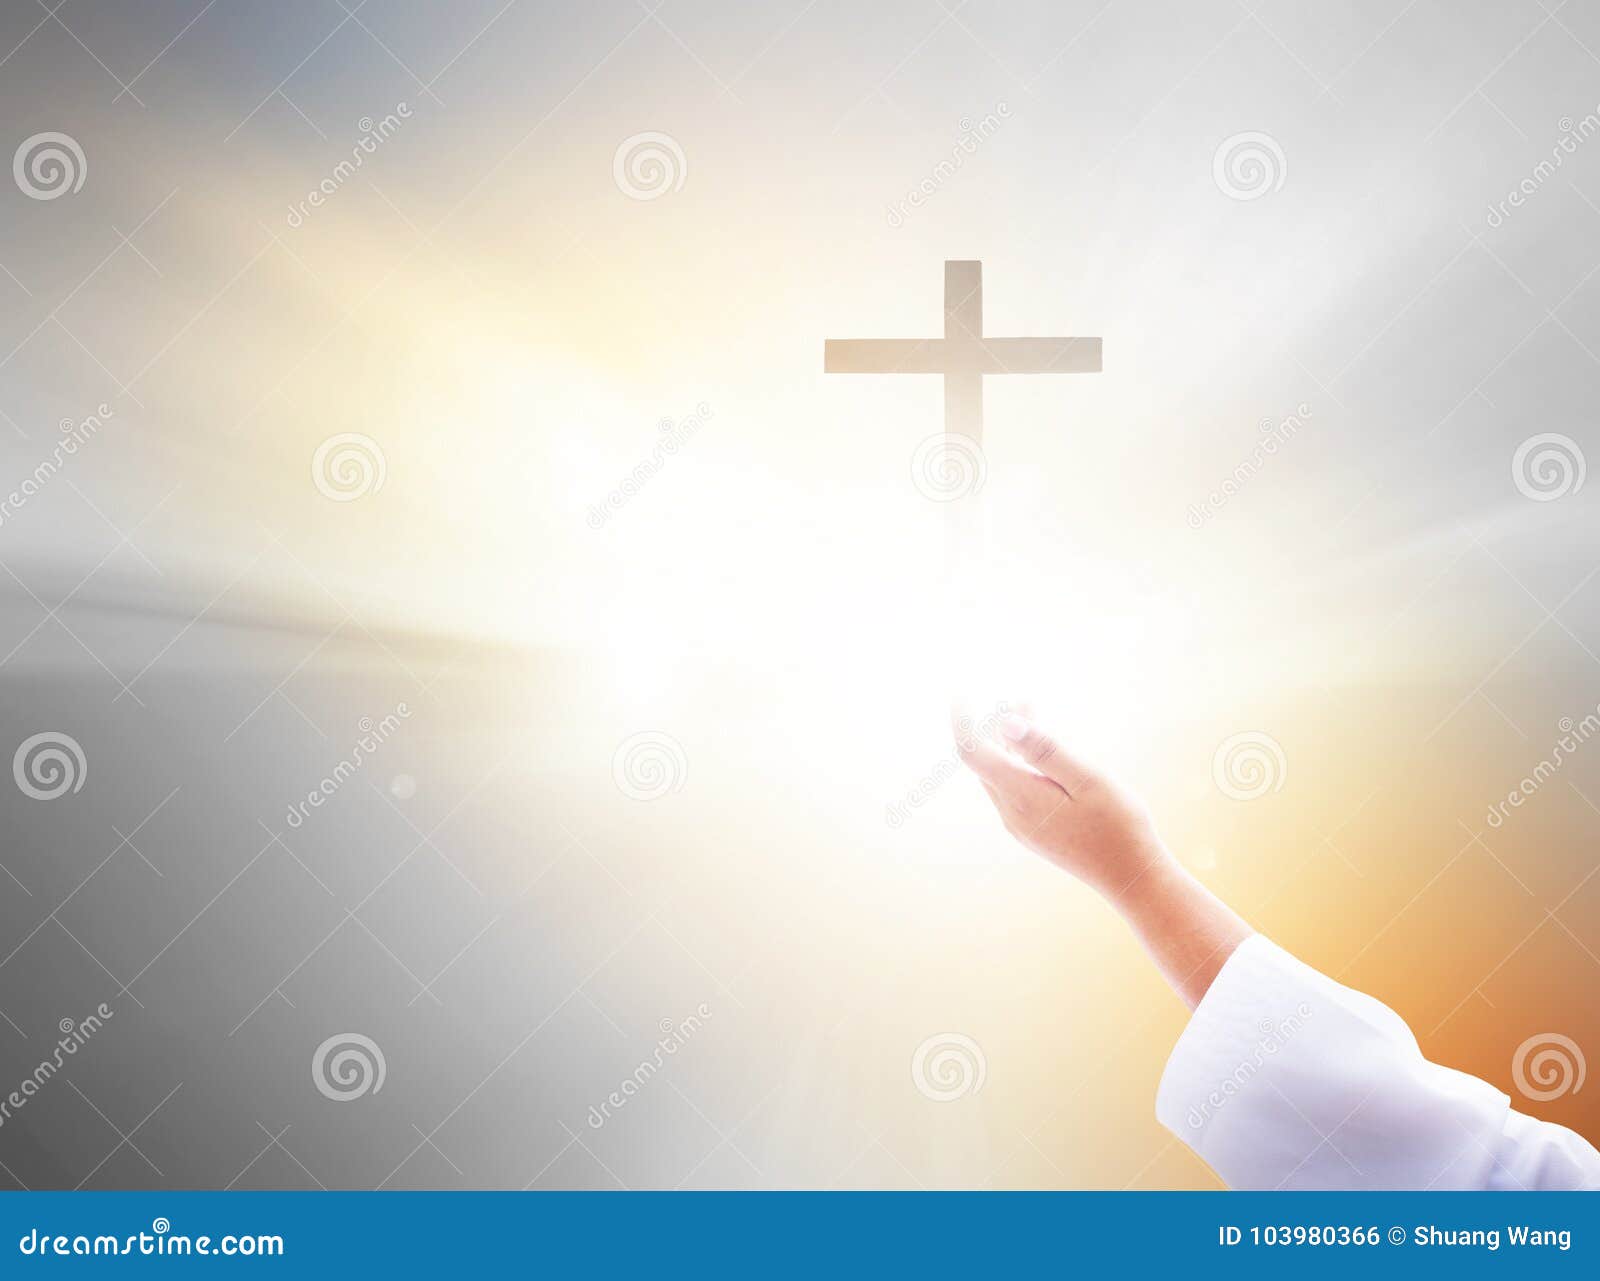 Human Hands Open Palm Up Worship Stock Photo - Image of bible, adults:  103980366